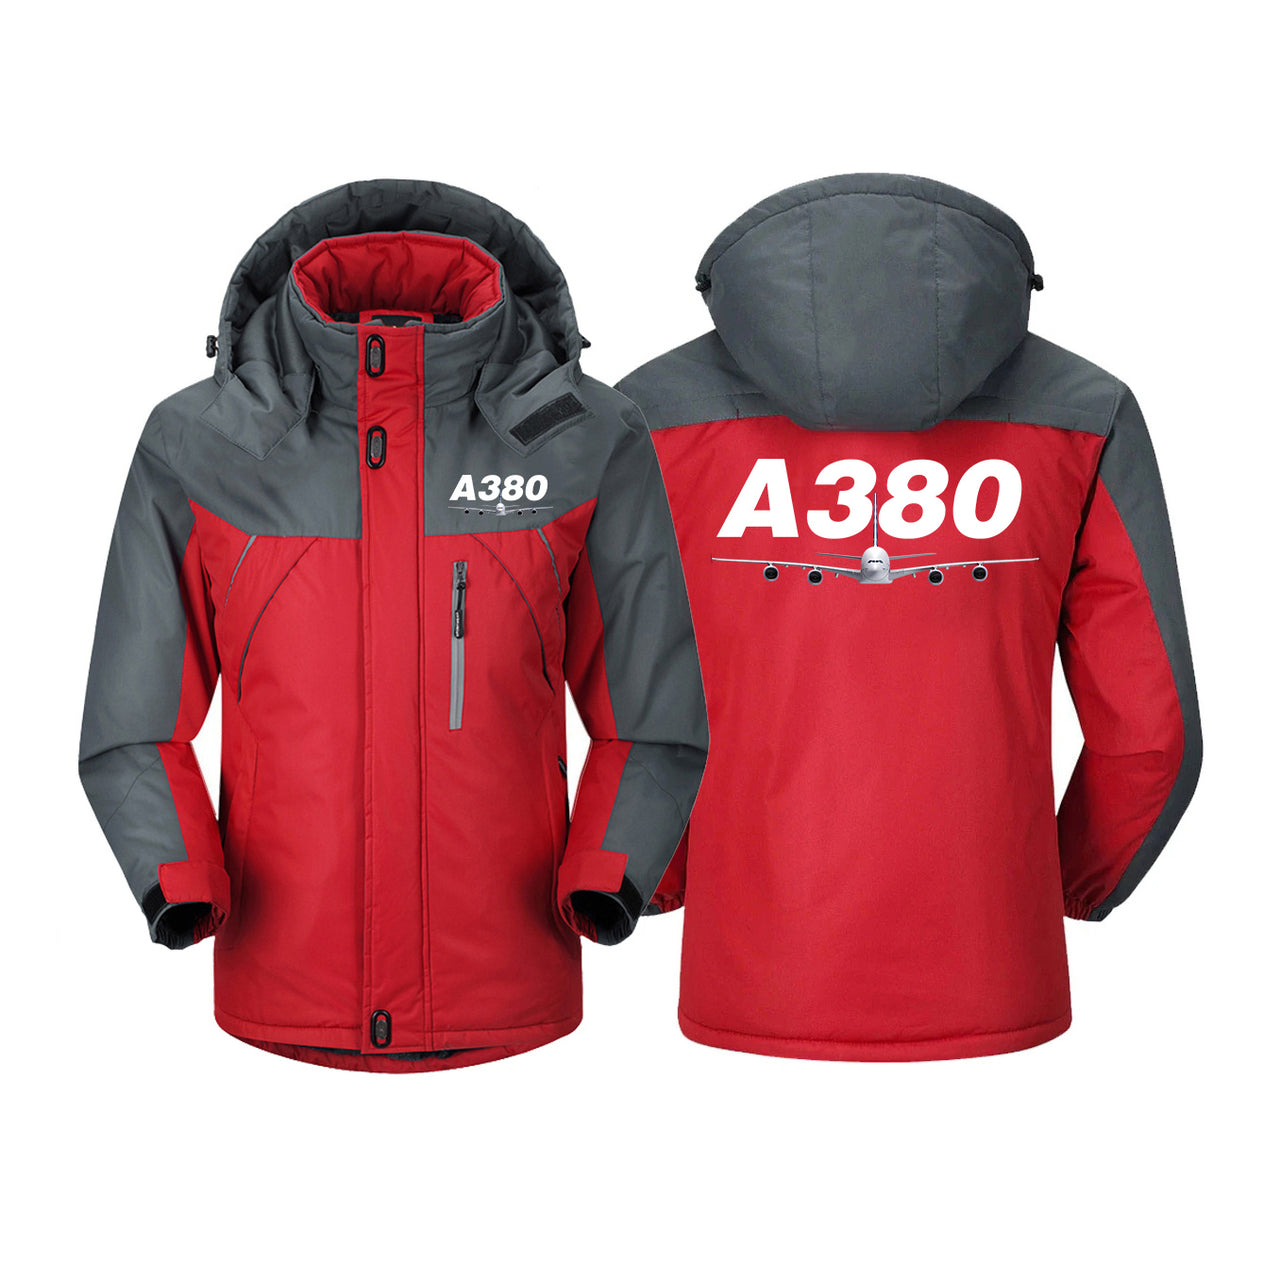 Super Airbus A380 Designed Thick Winter Jackets